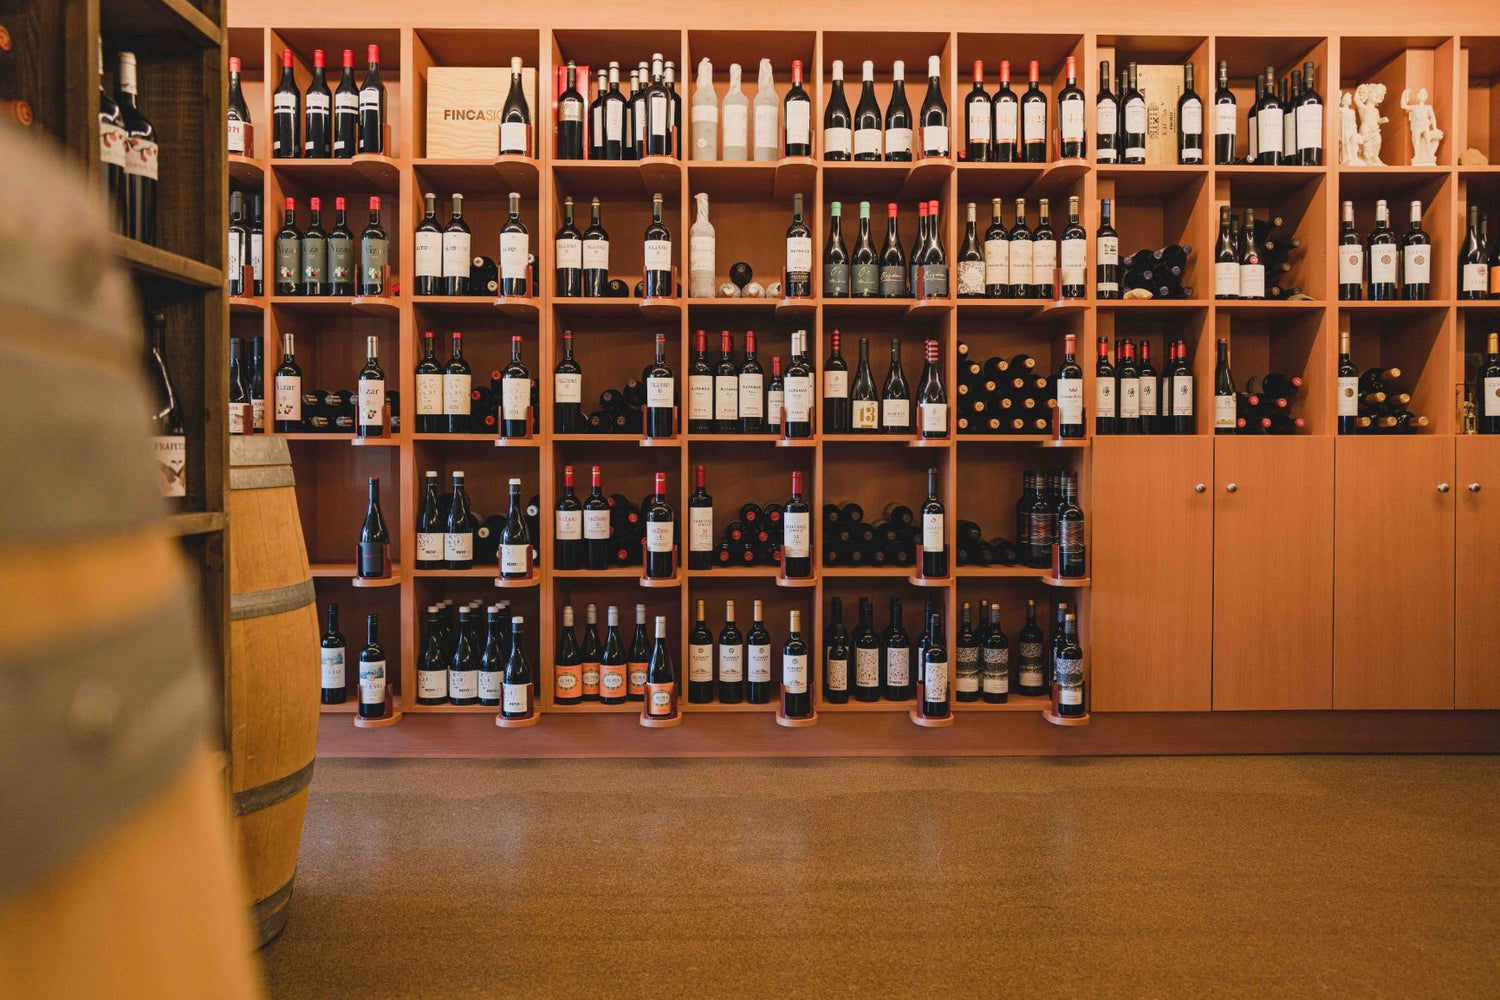 An image showing Elvino's wine shelf at their store in Brugge